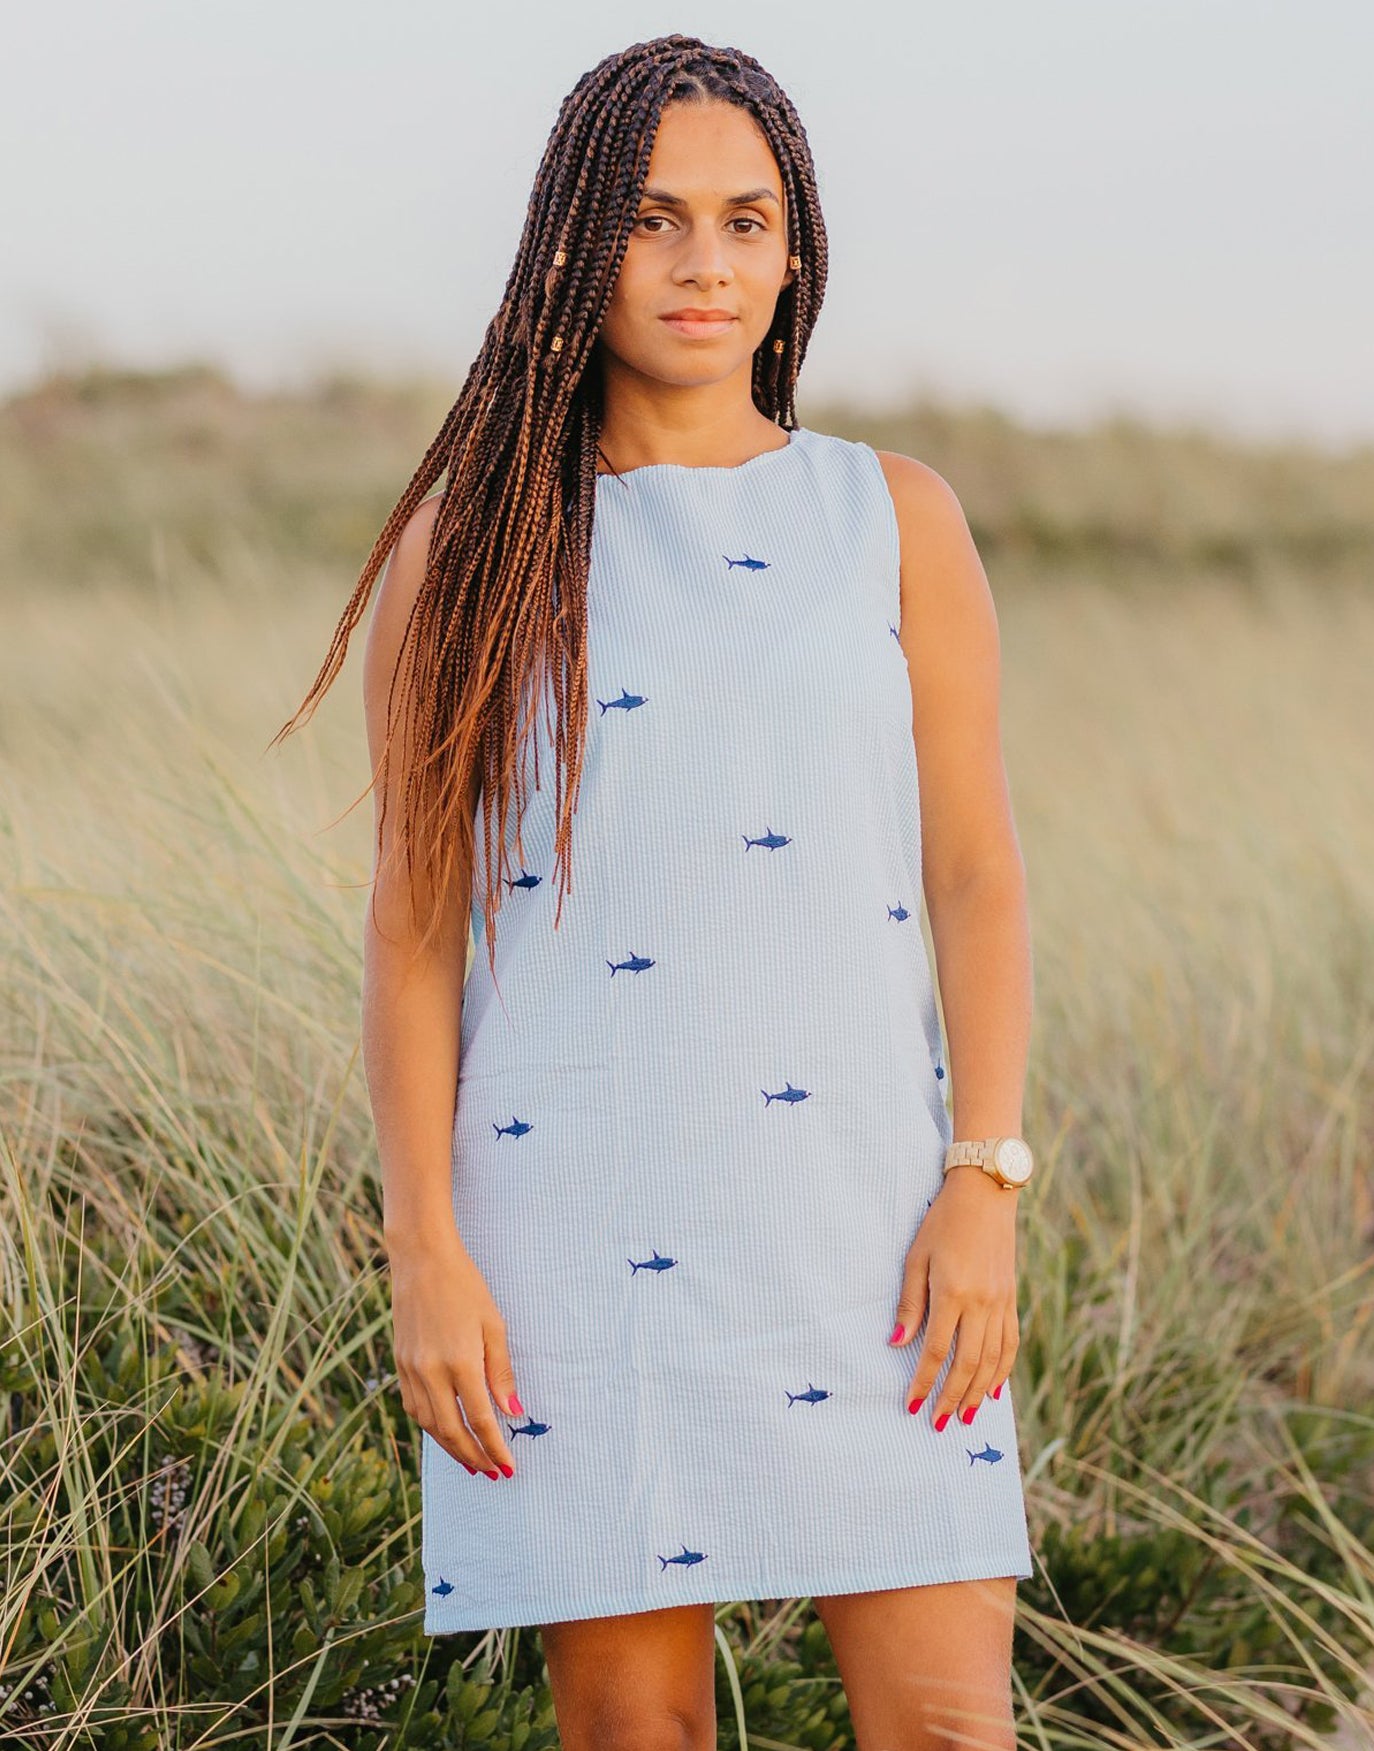 Turquoise Seersucker Women's Dress with Navy Embroidered Sharks